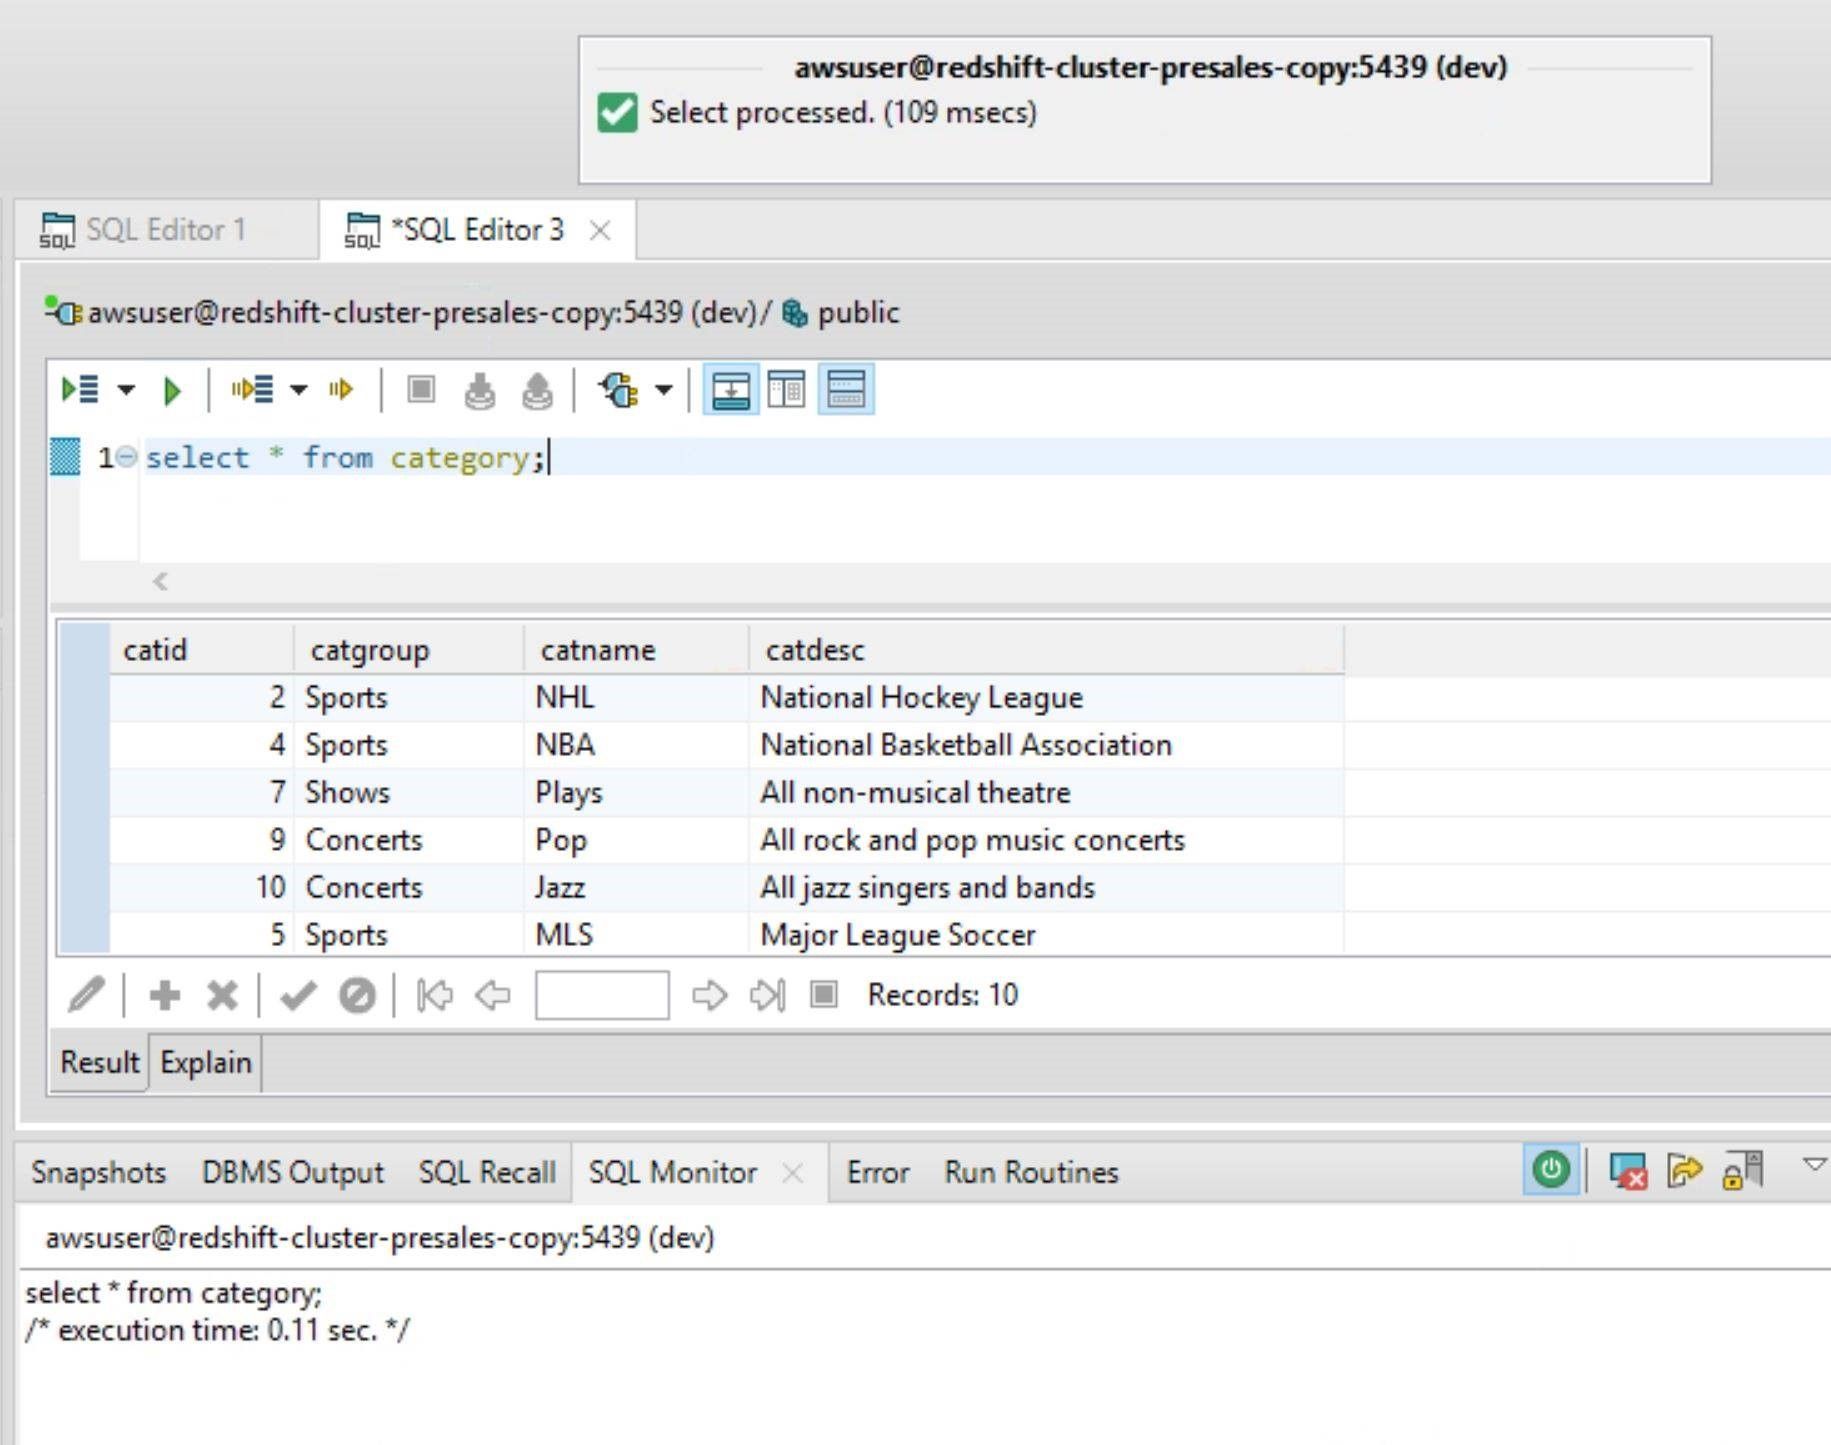 Screen capture showing the results of a SQL statement coded and then executed within the Toad Edge client application, accessing data from Redshift.  